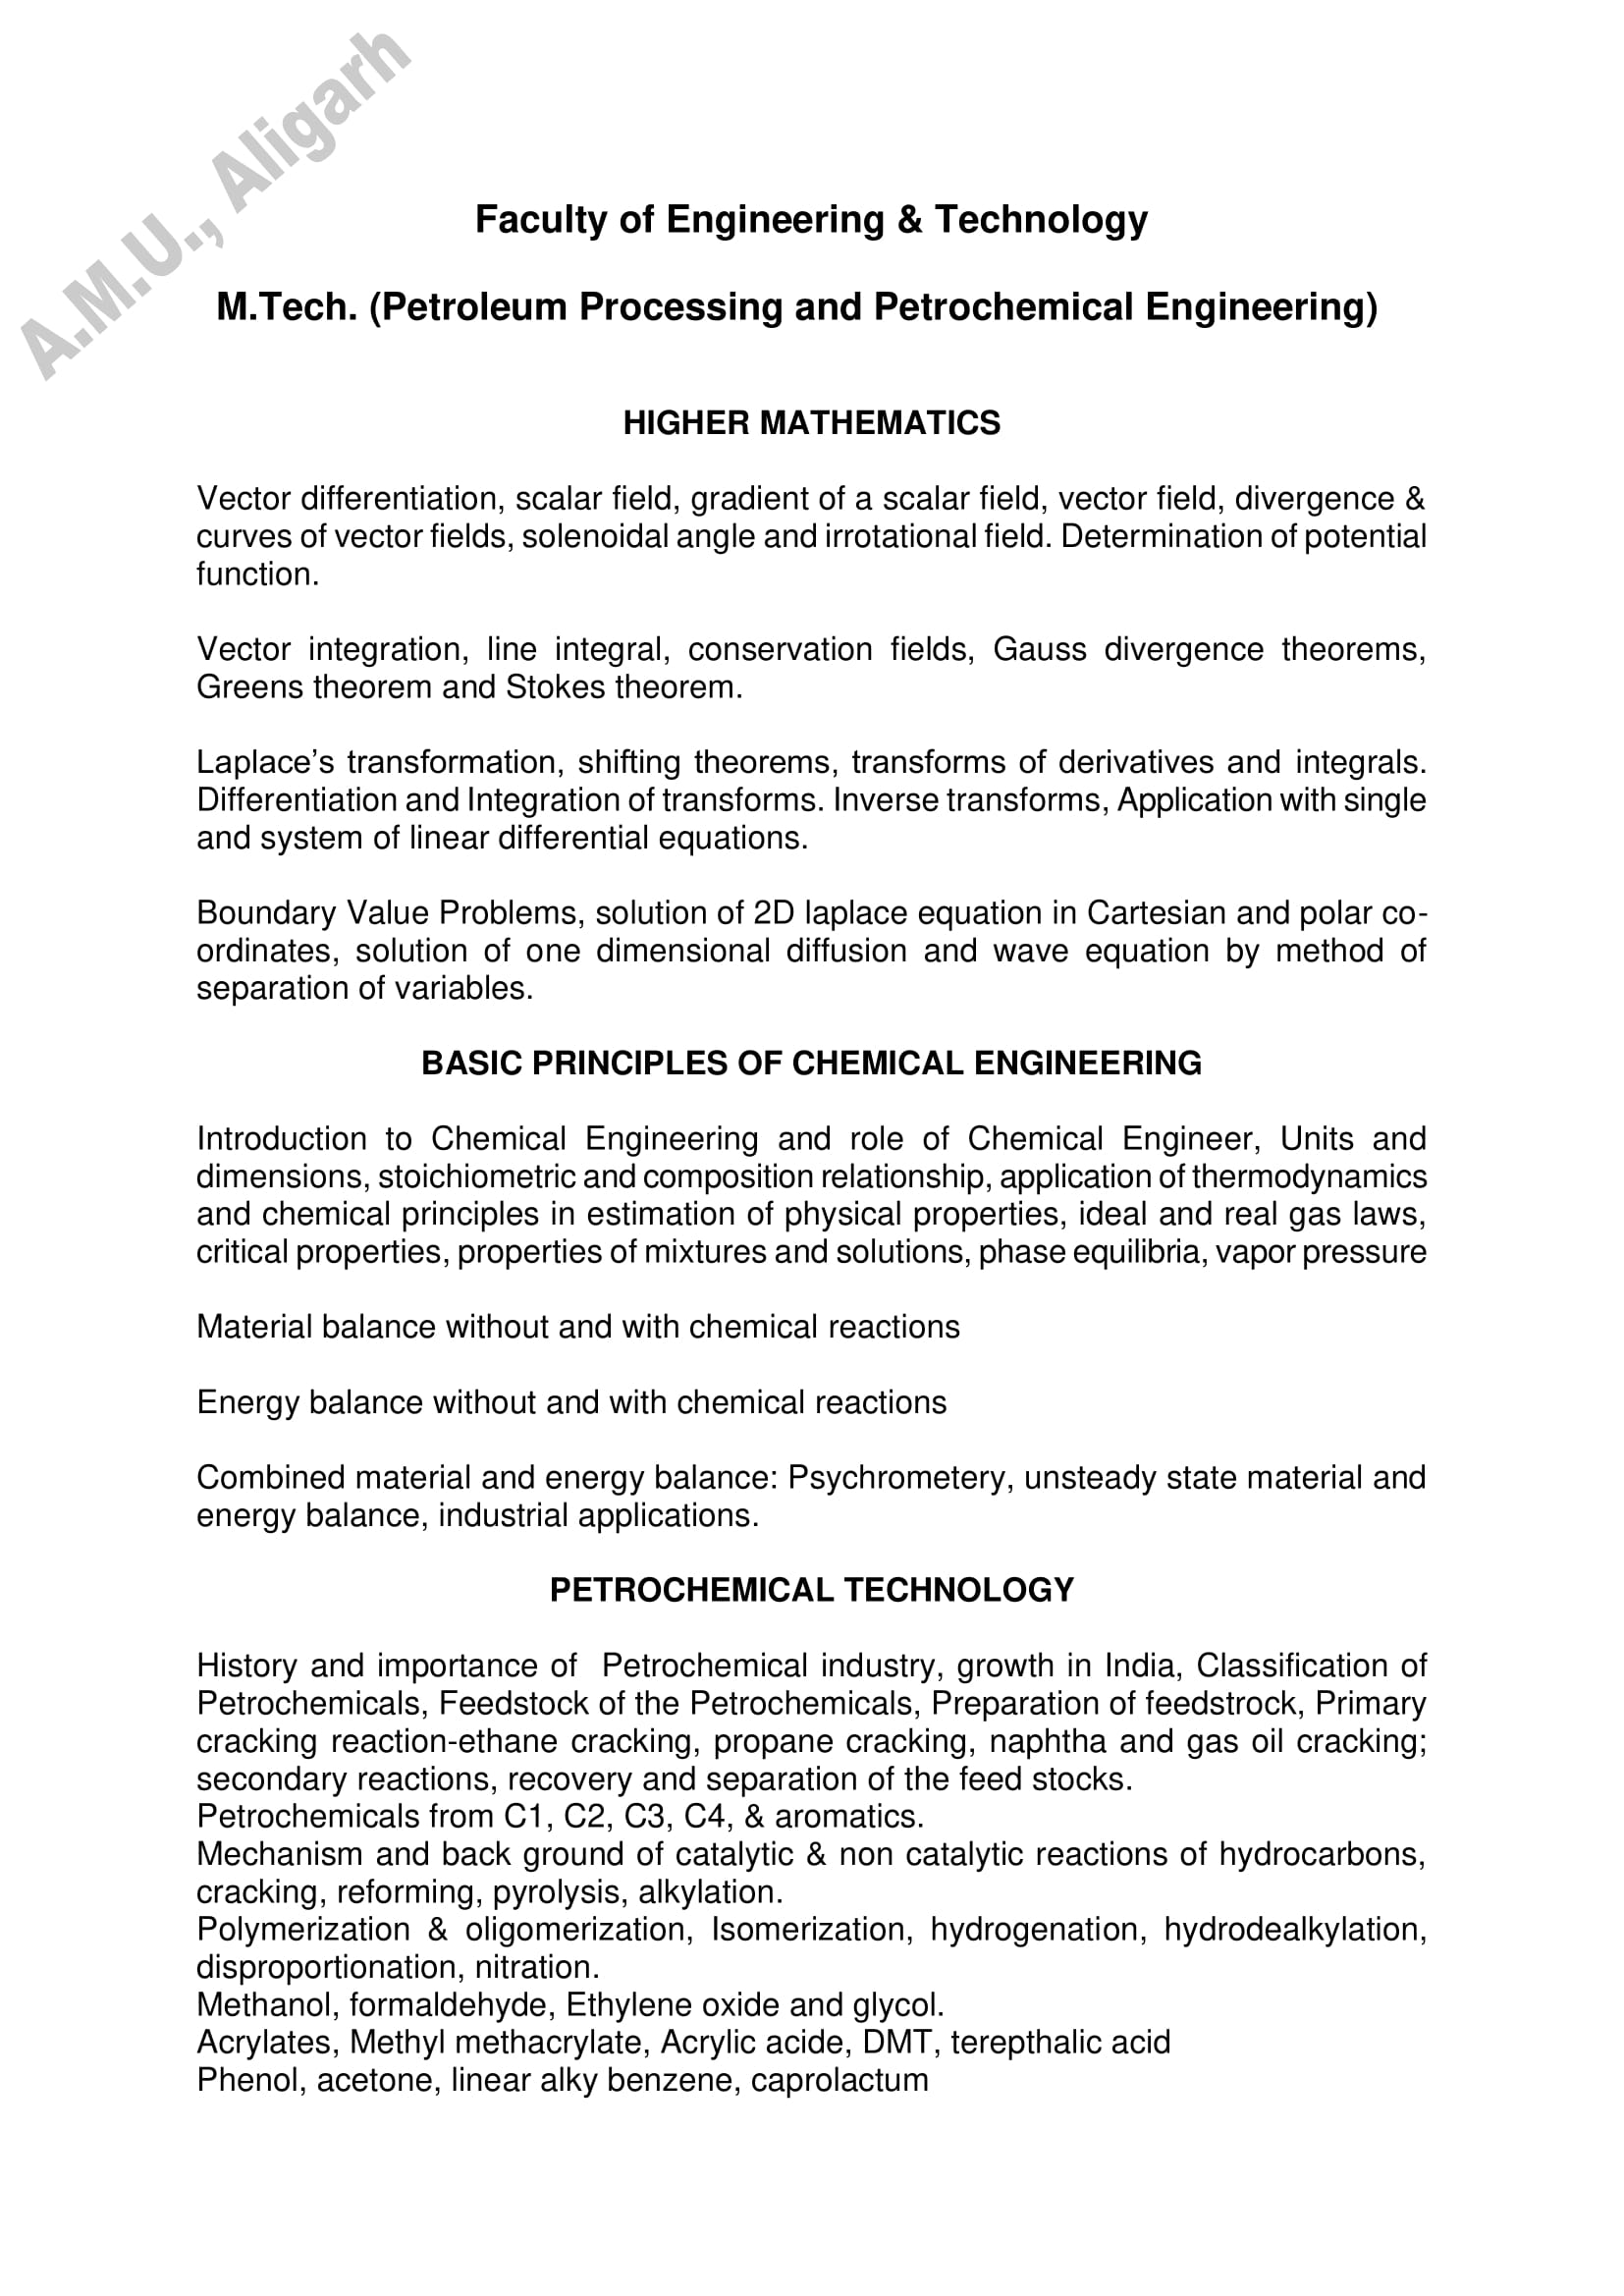 AMU Entrance Exam Syllabus for M.Tech in Petroleum Processing and Petrochemical Engineering - Page 1